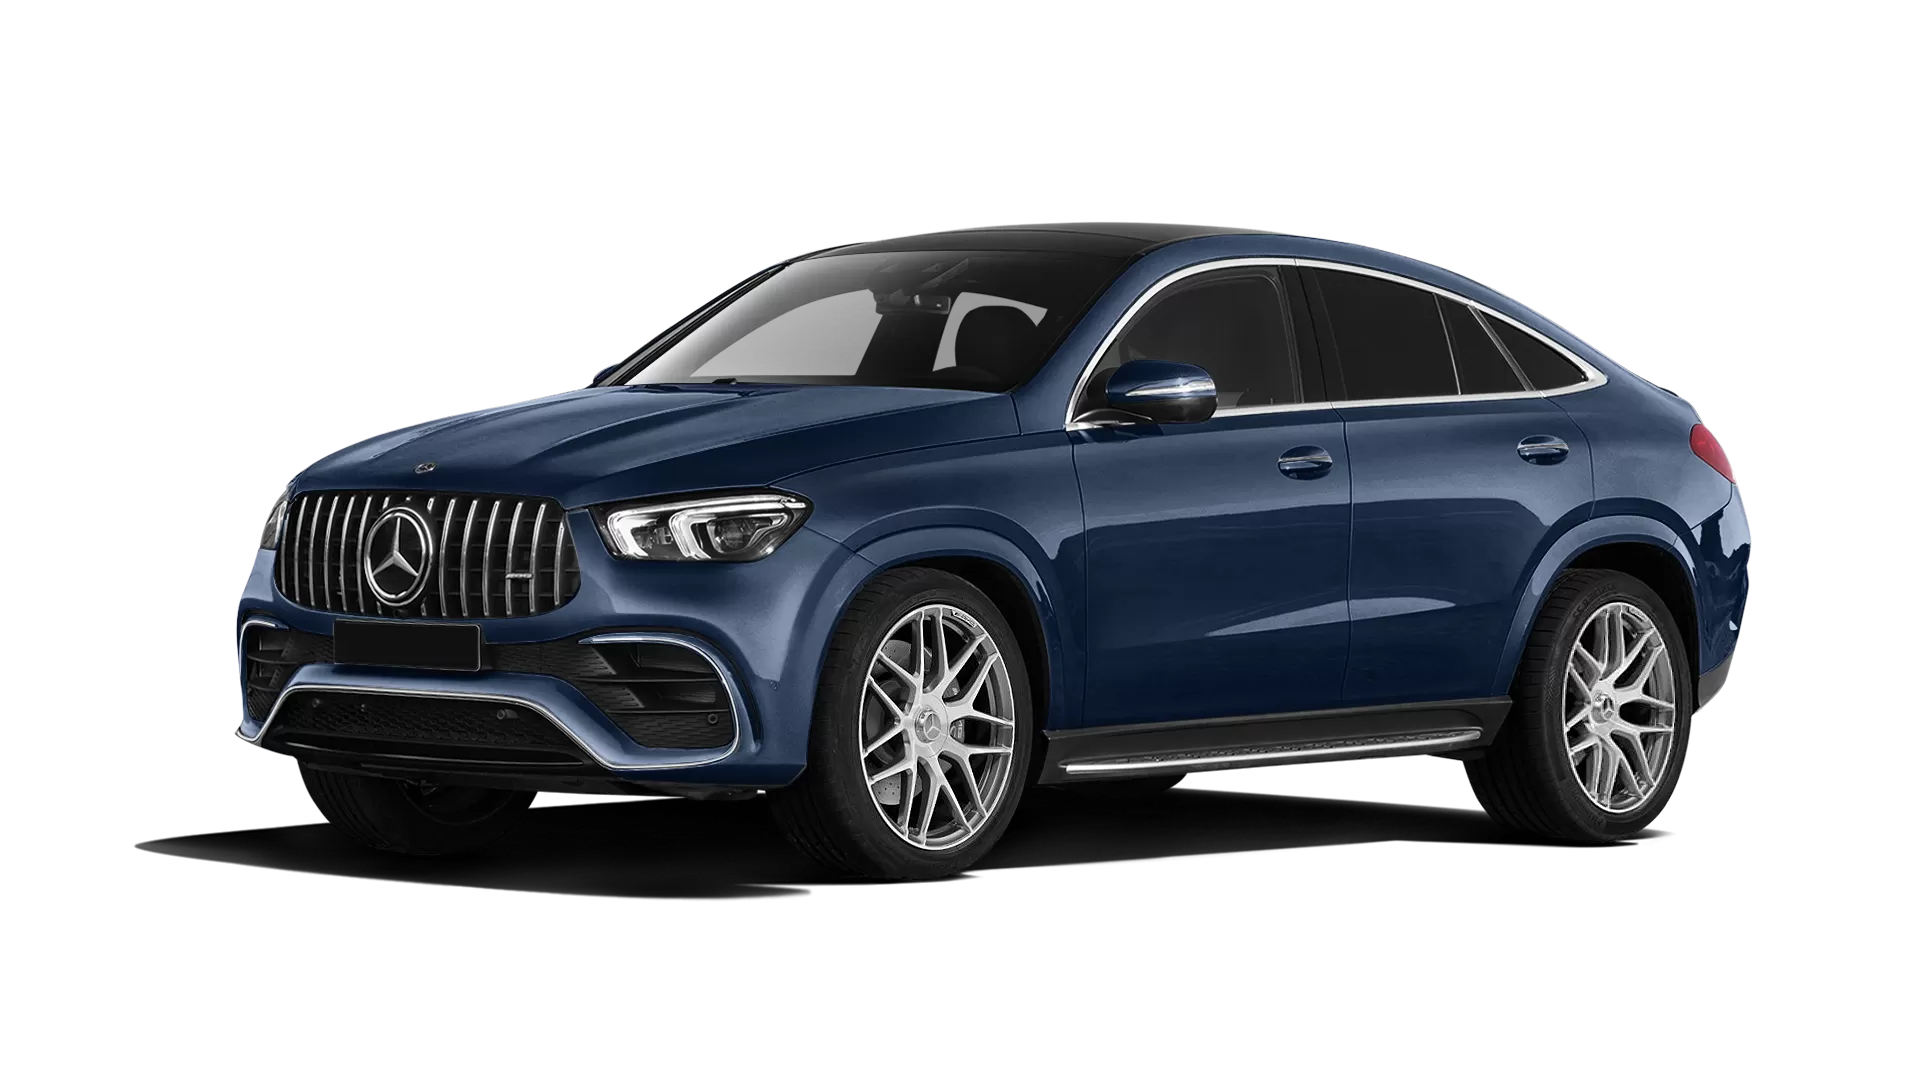 Mercedes GLE Coupe AMG 63 C167 stock front view in Cavansite Blue color